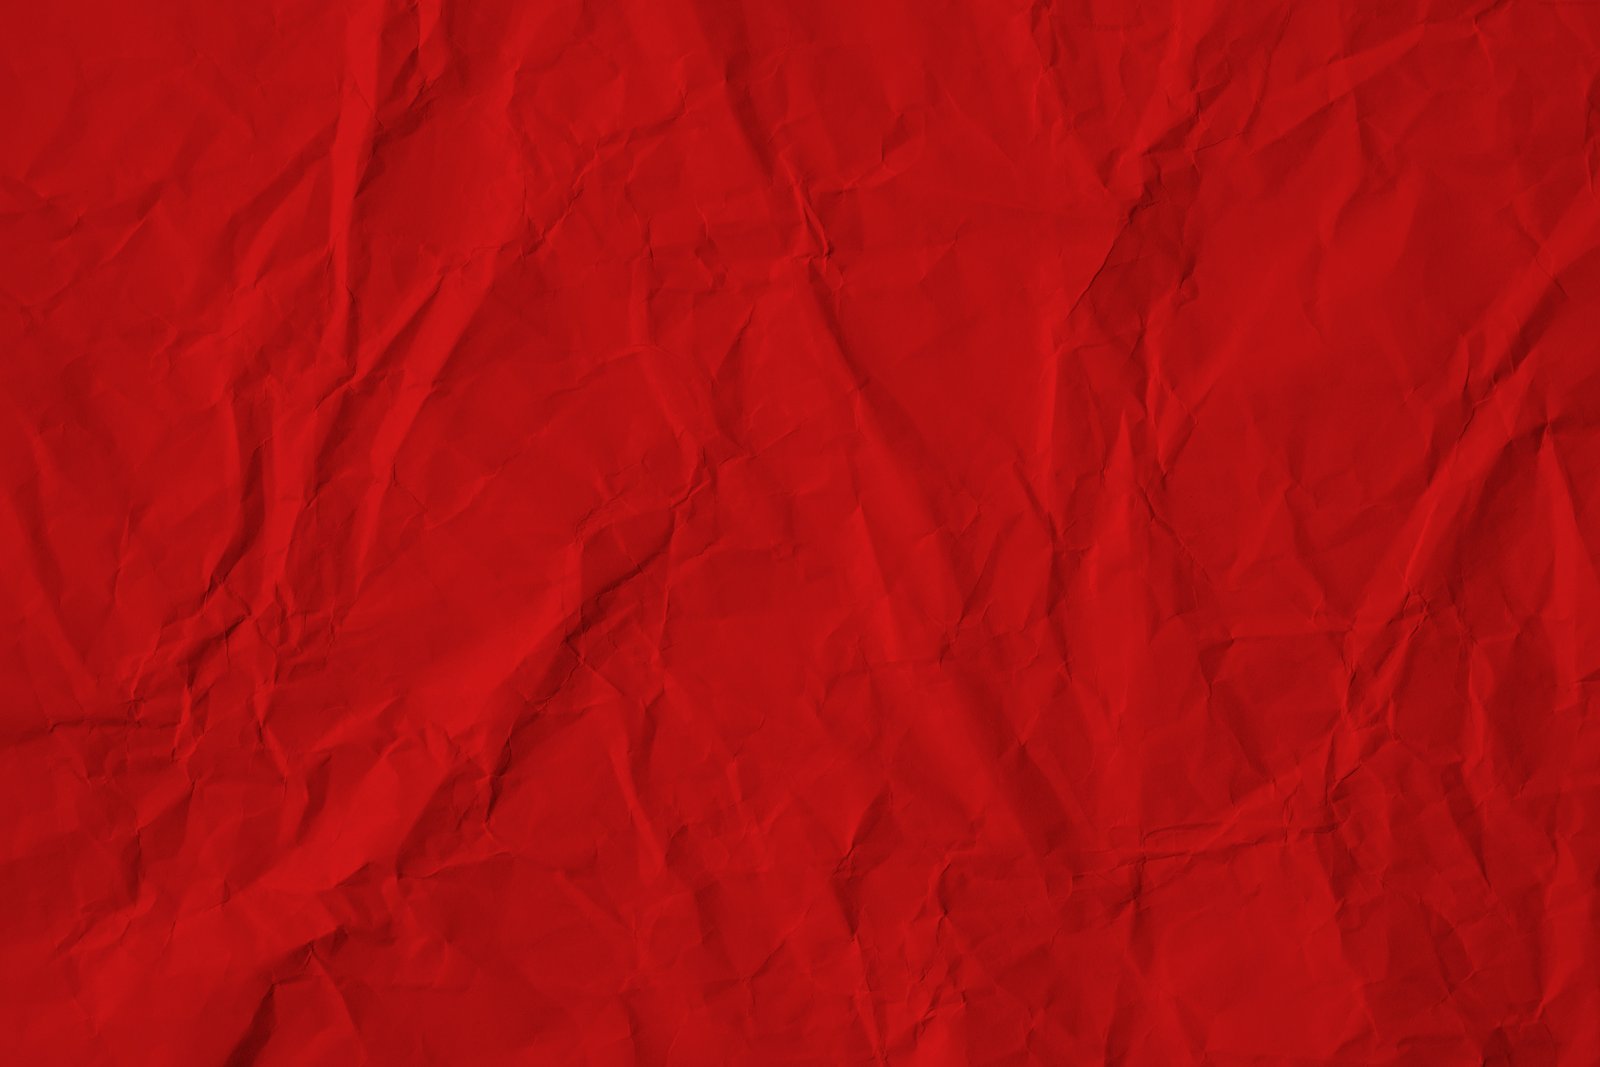 Old red paper background - PSDgraphics